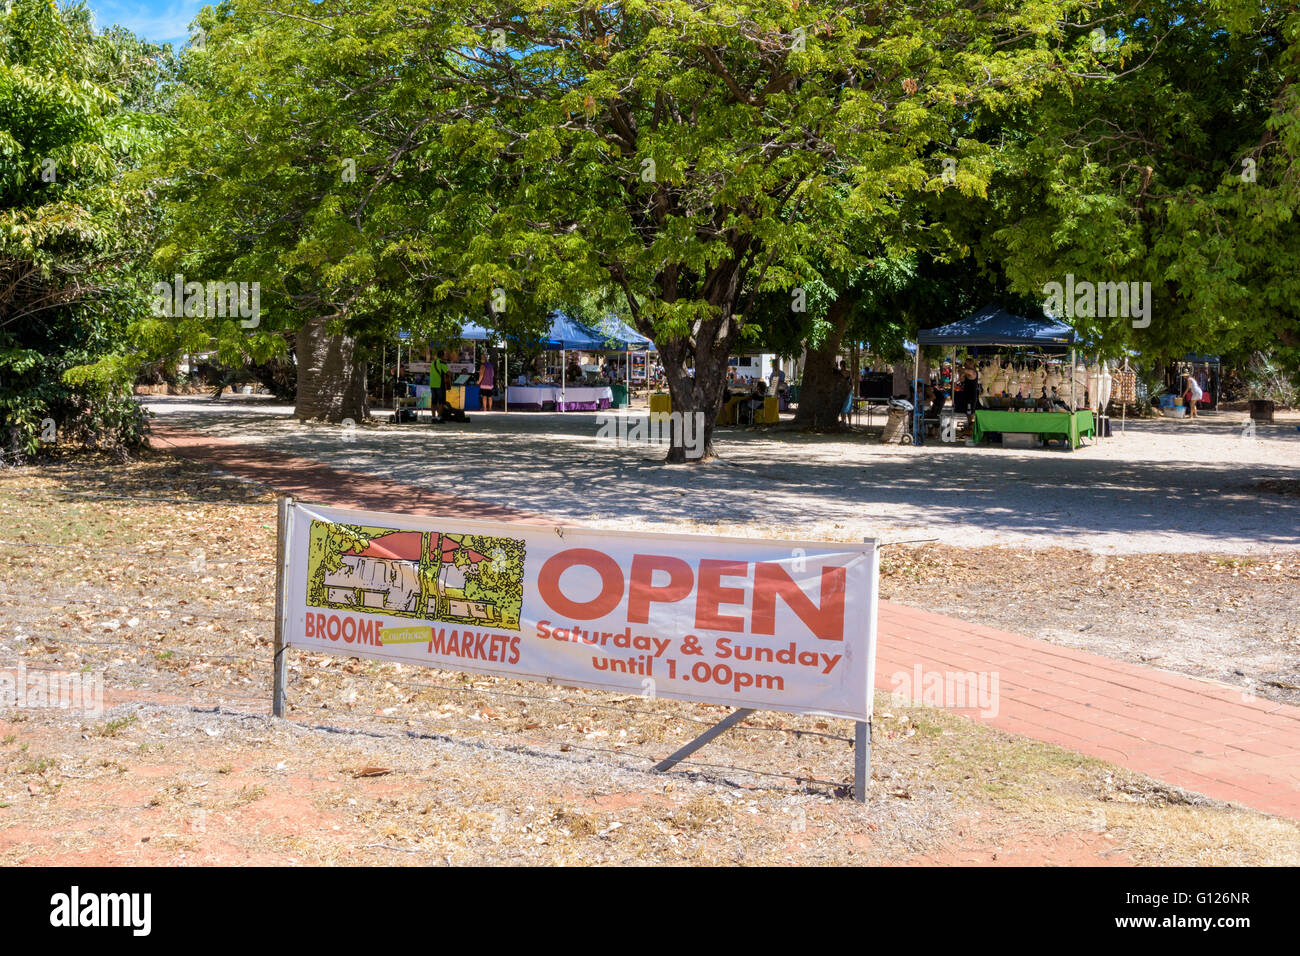 Entrance and Sign for Broome's Courthouse Markets in old Broome ...